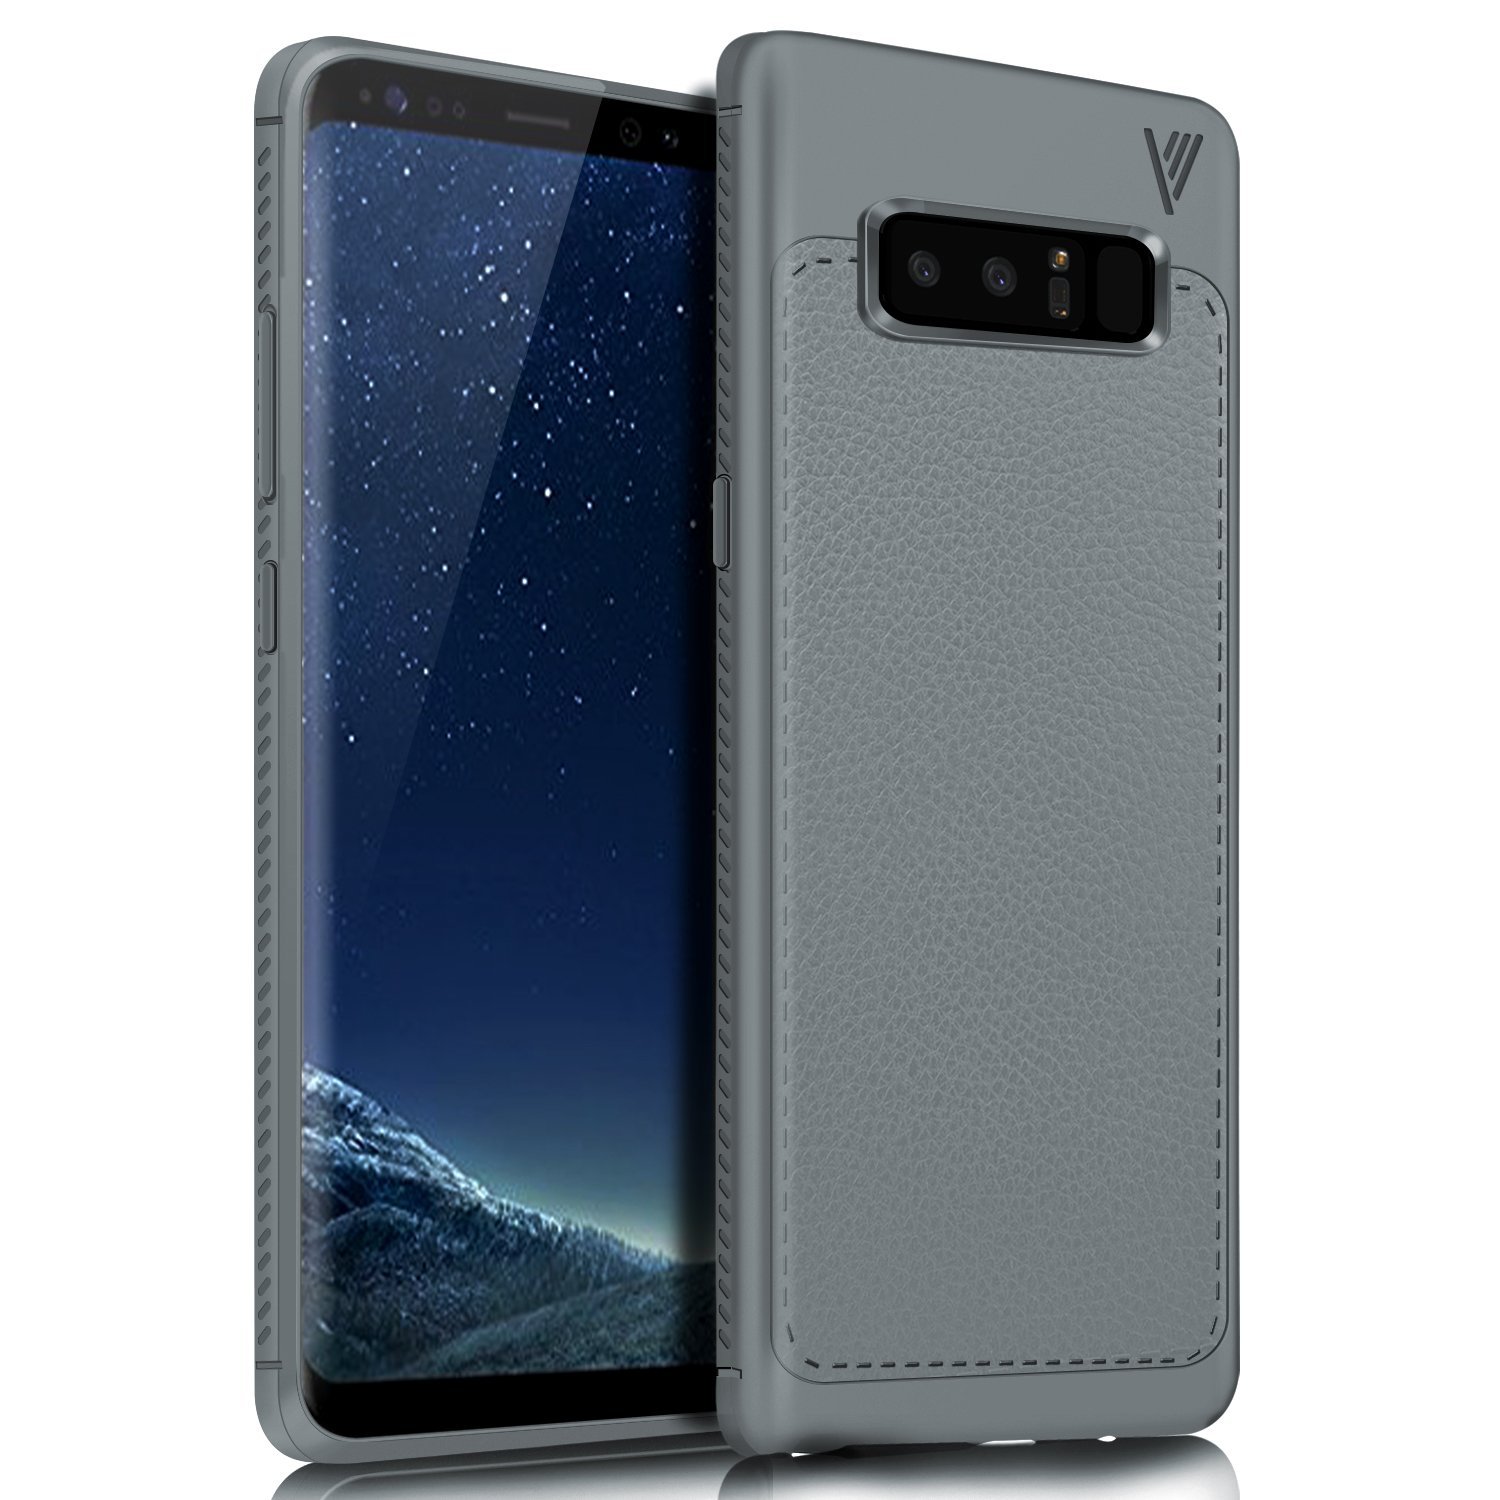 YockTec Soft Imitation Leather Case For Galaxy Note 8